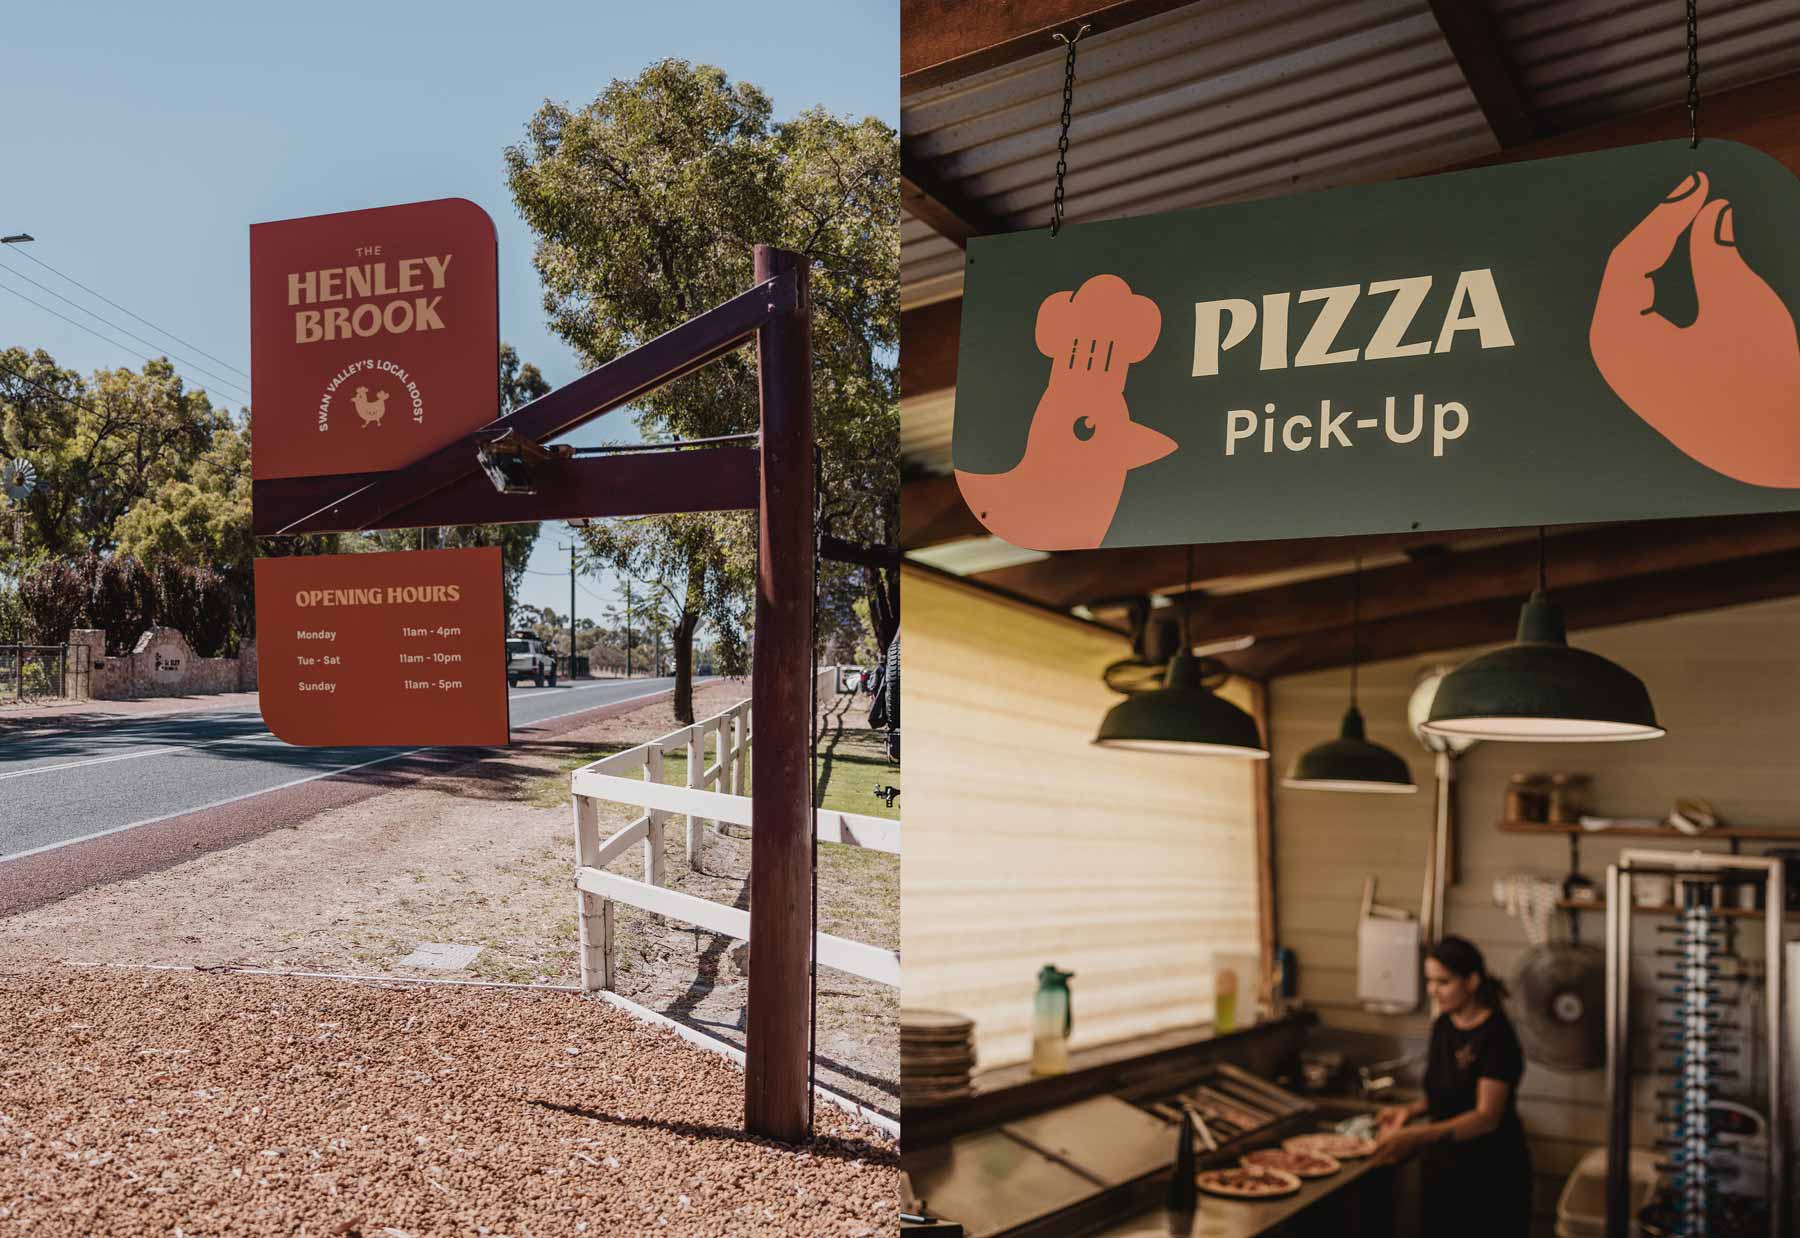 The Henley Brook signage brand application